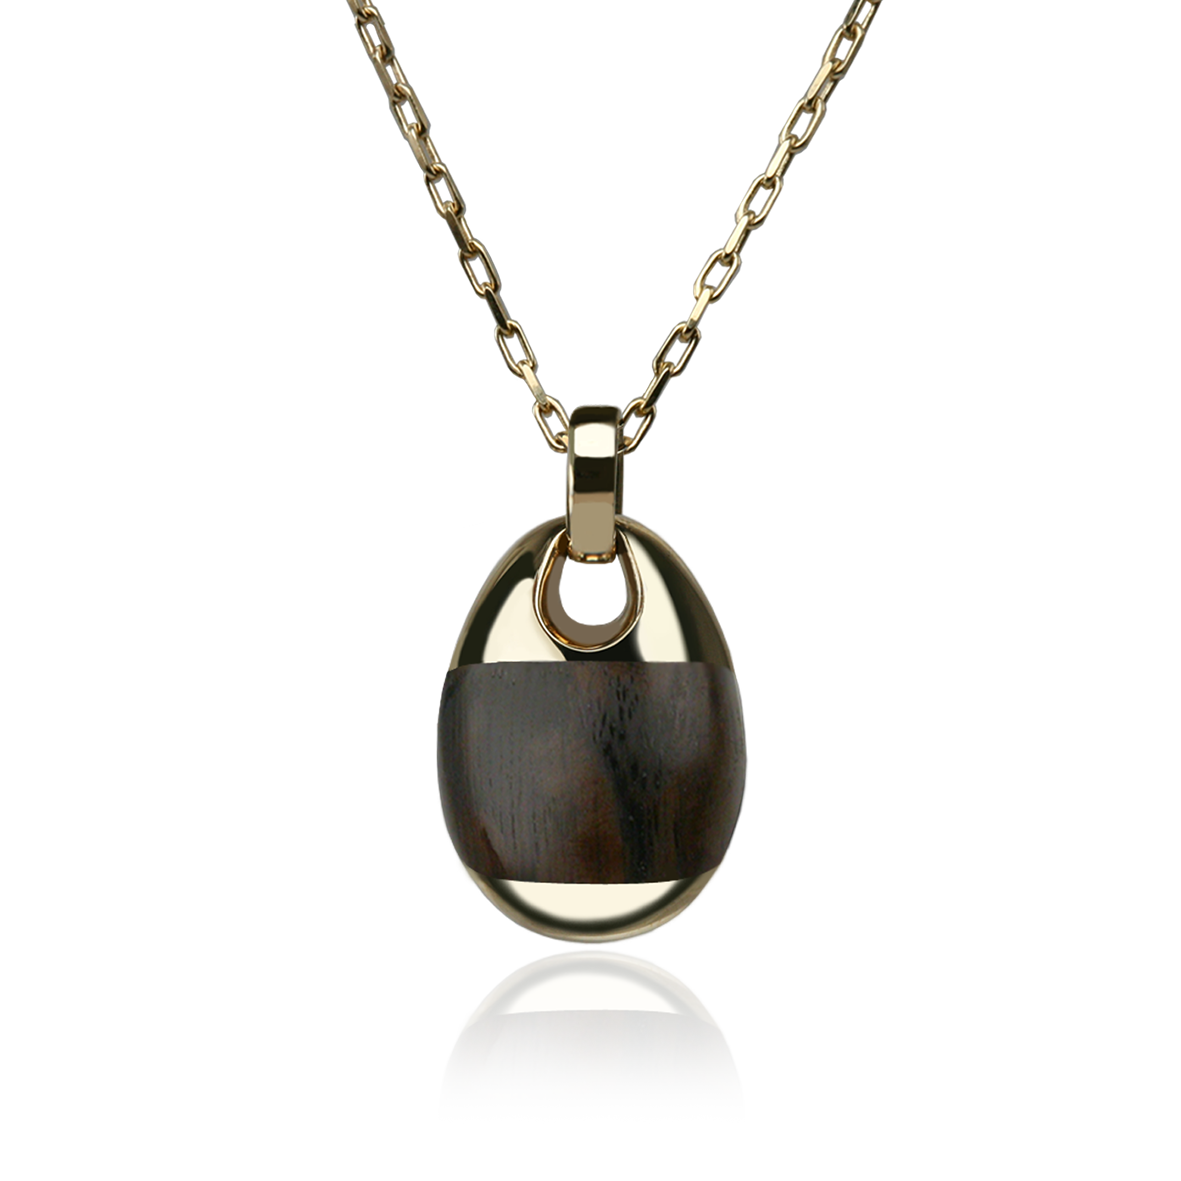 Stephen Einhorn Thames wood Pebble Necklace in yellow Gold